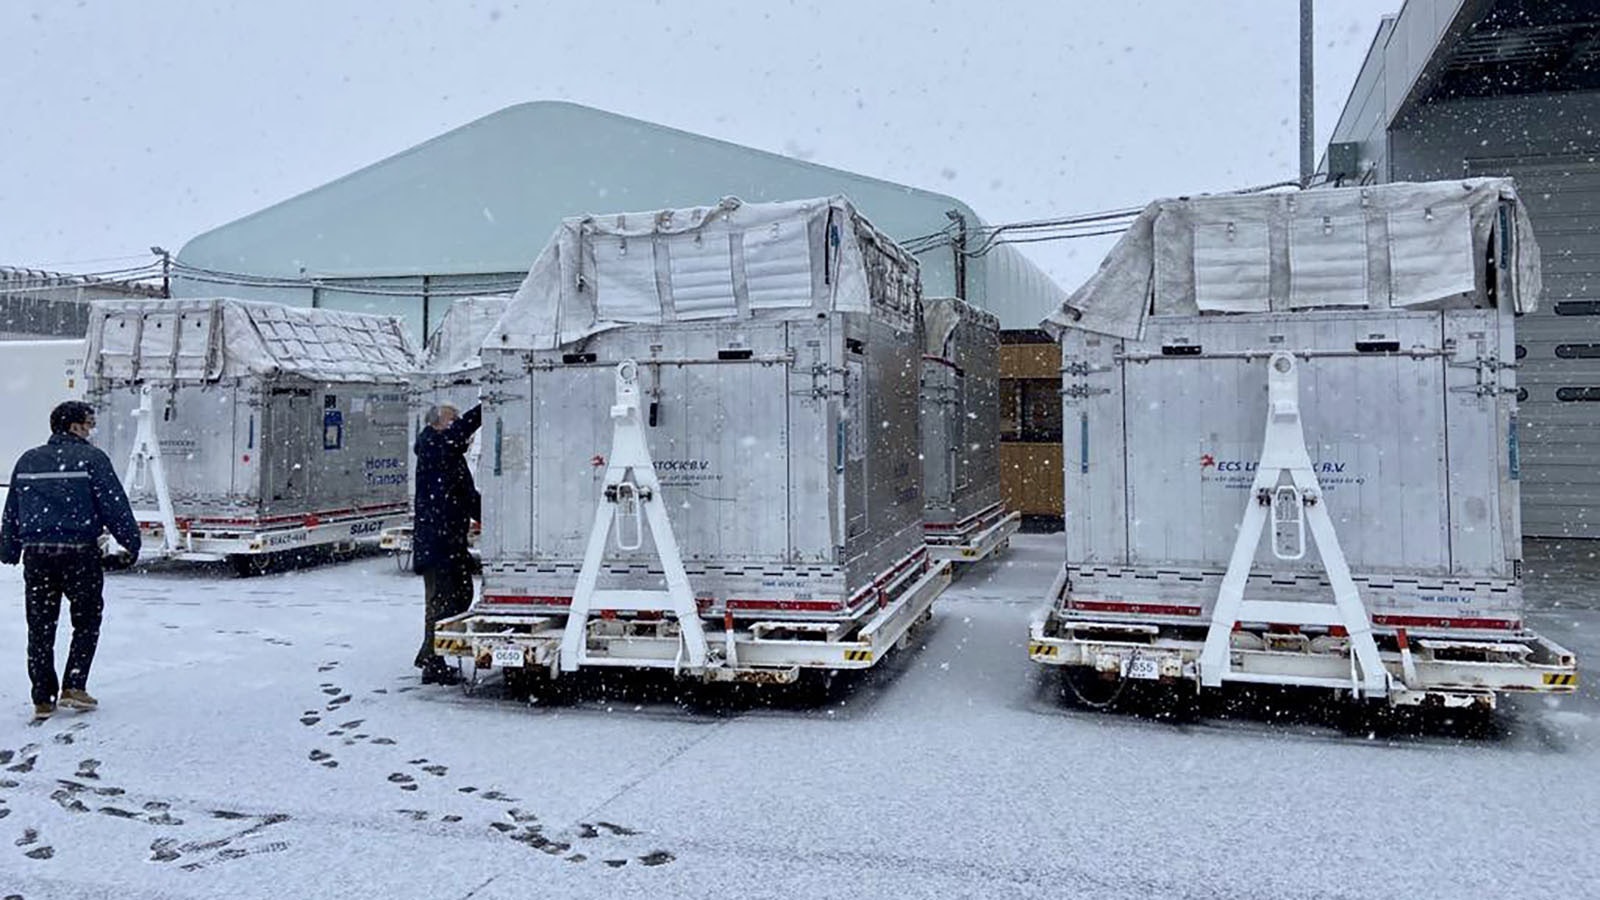 The international company IRT ships horses all over the world using scheduled air charter carriers. Its U.S. branch is based out of Chicago. Here air stalls with horses are ready for shipment from Japan to Australia.